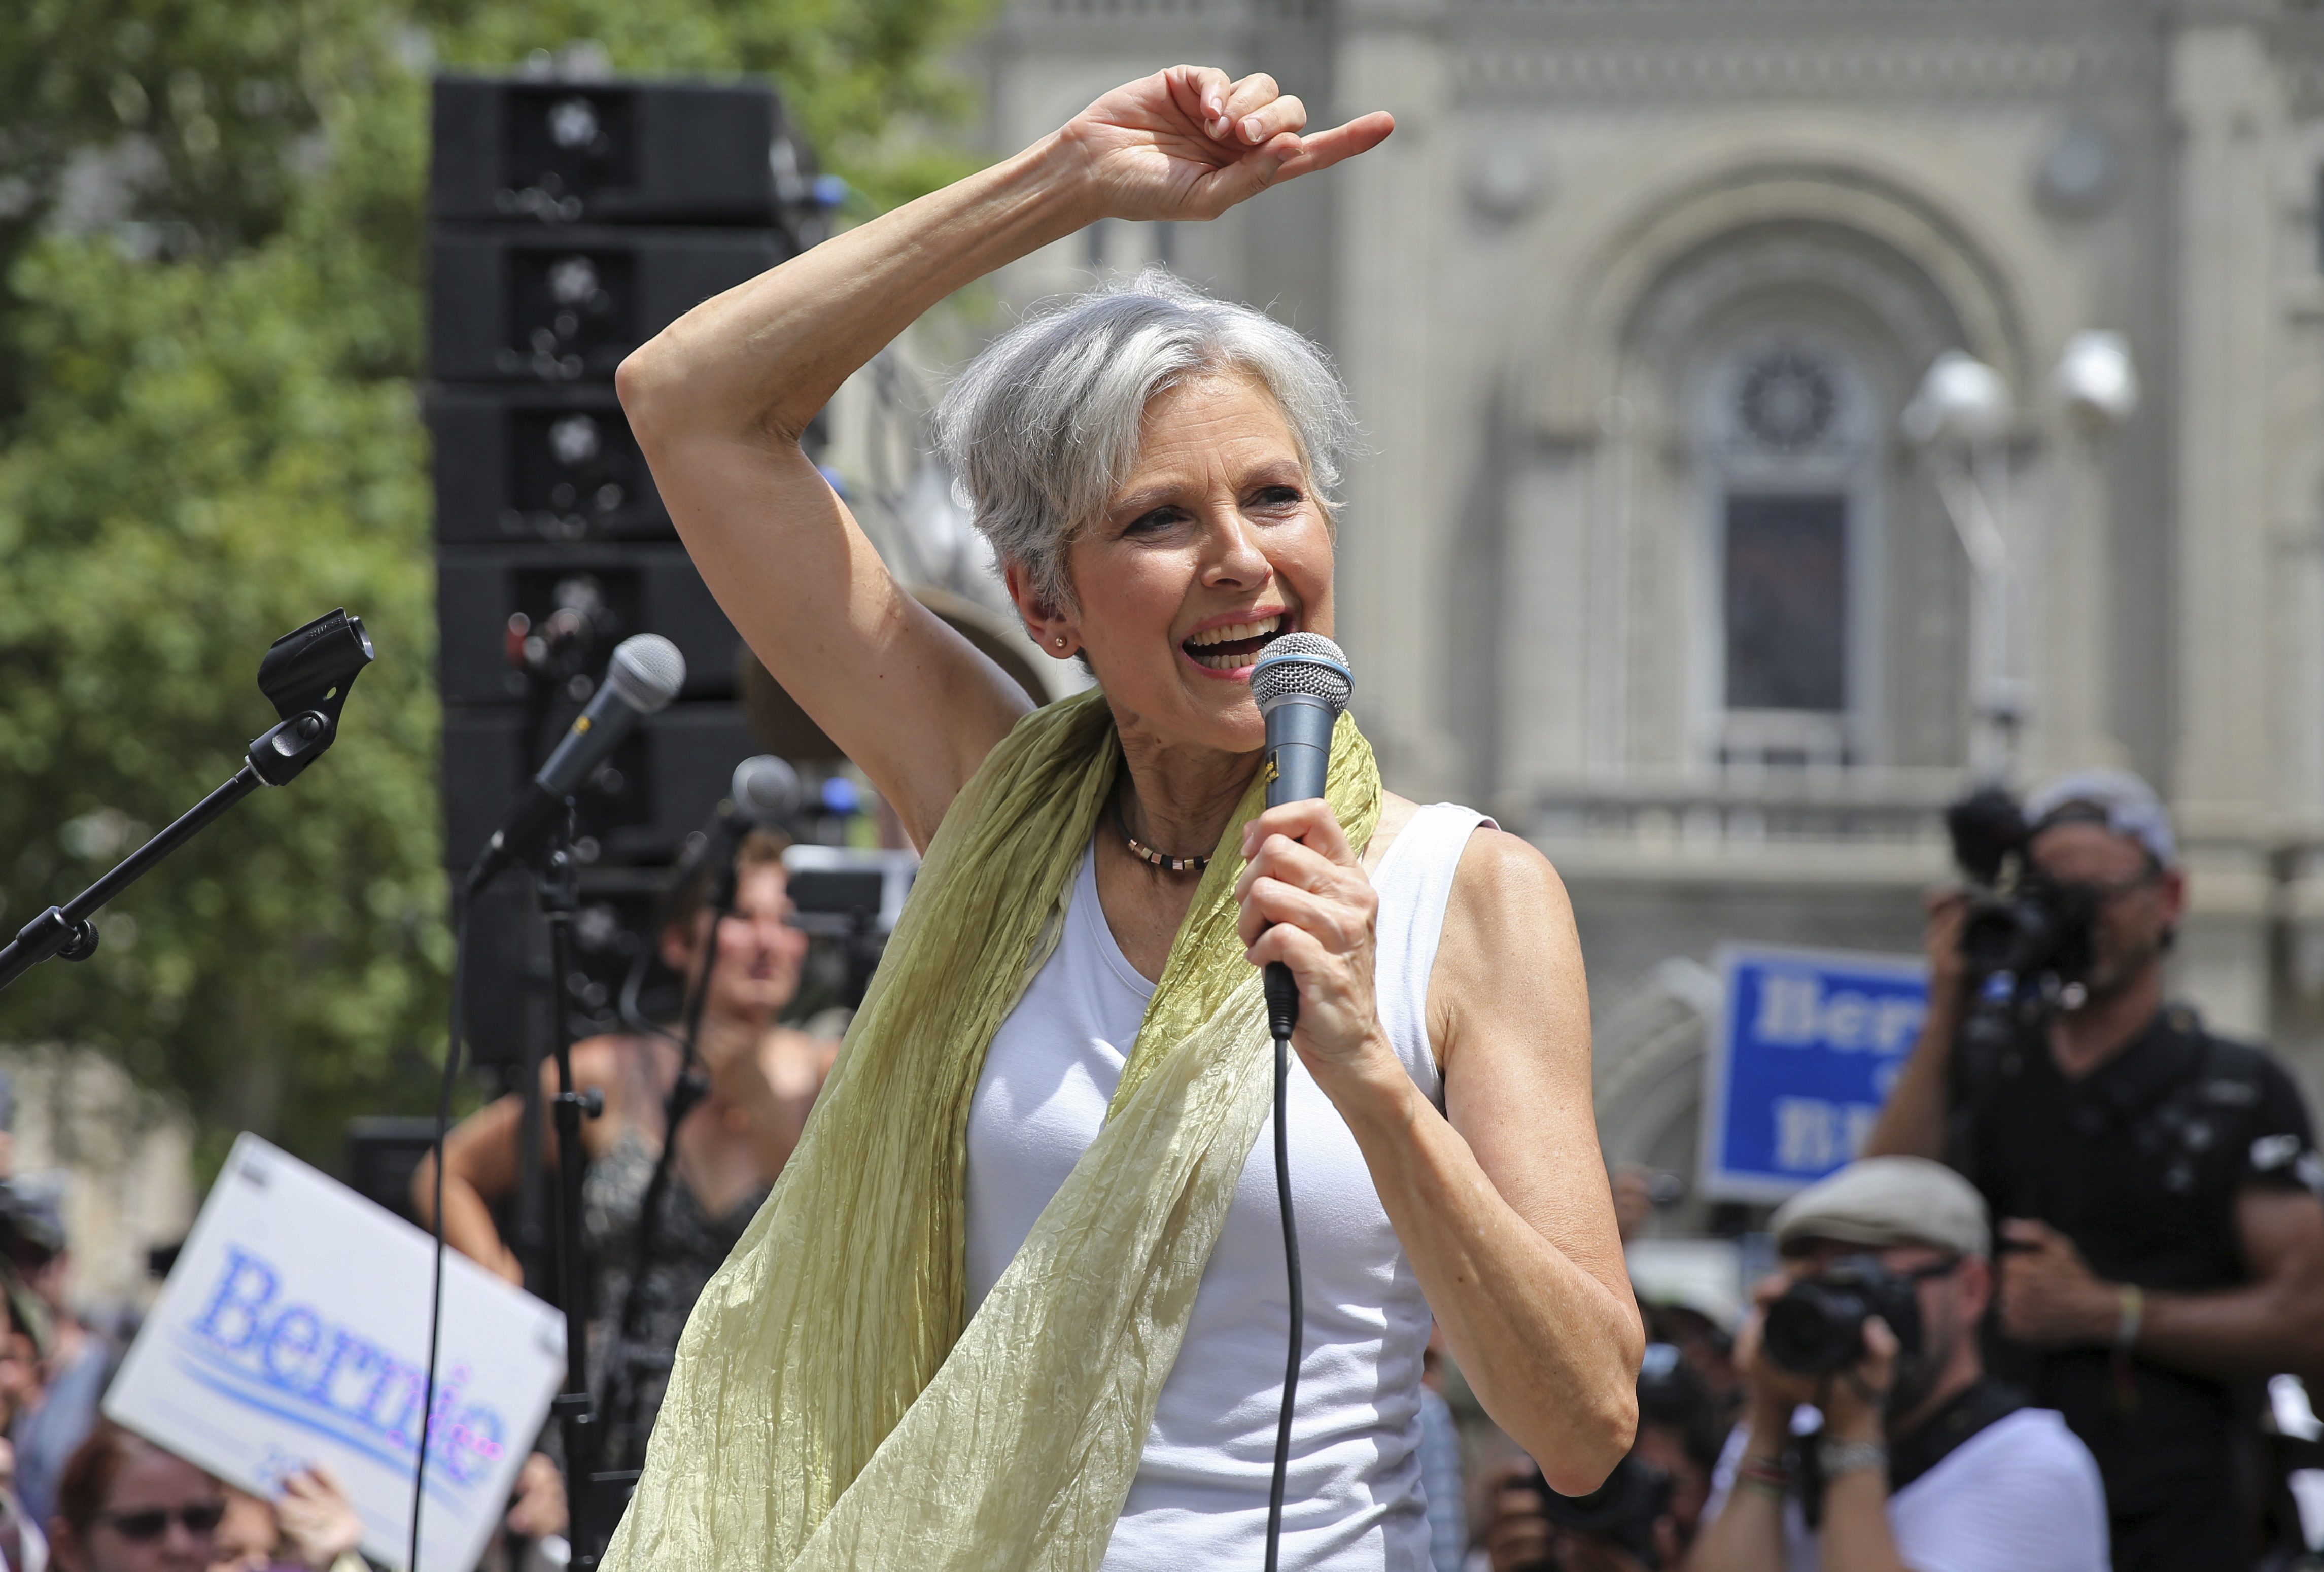 Green Party presidential candidate Jill Stein speaks during a rally of Bernie Sanders supporters outside the Wells Fargo Center on the second day of the Democratic National Convention in Philadelphia, Pennsylvania, July 26, 2016. REUTERS/Dominick Reuter